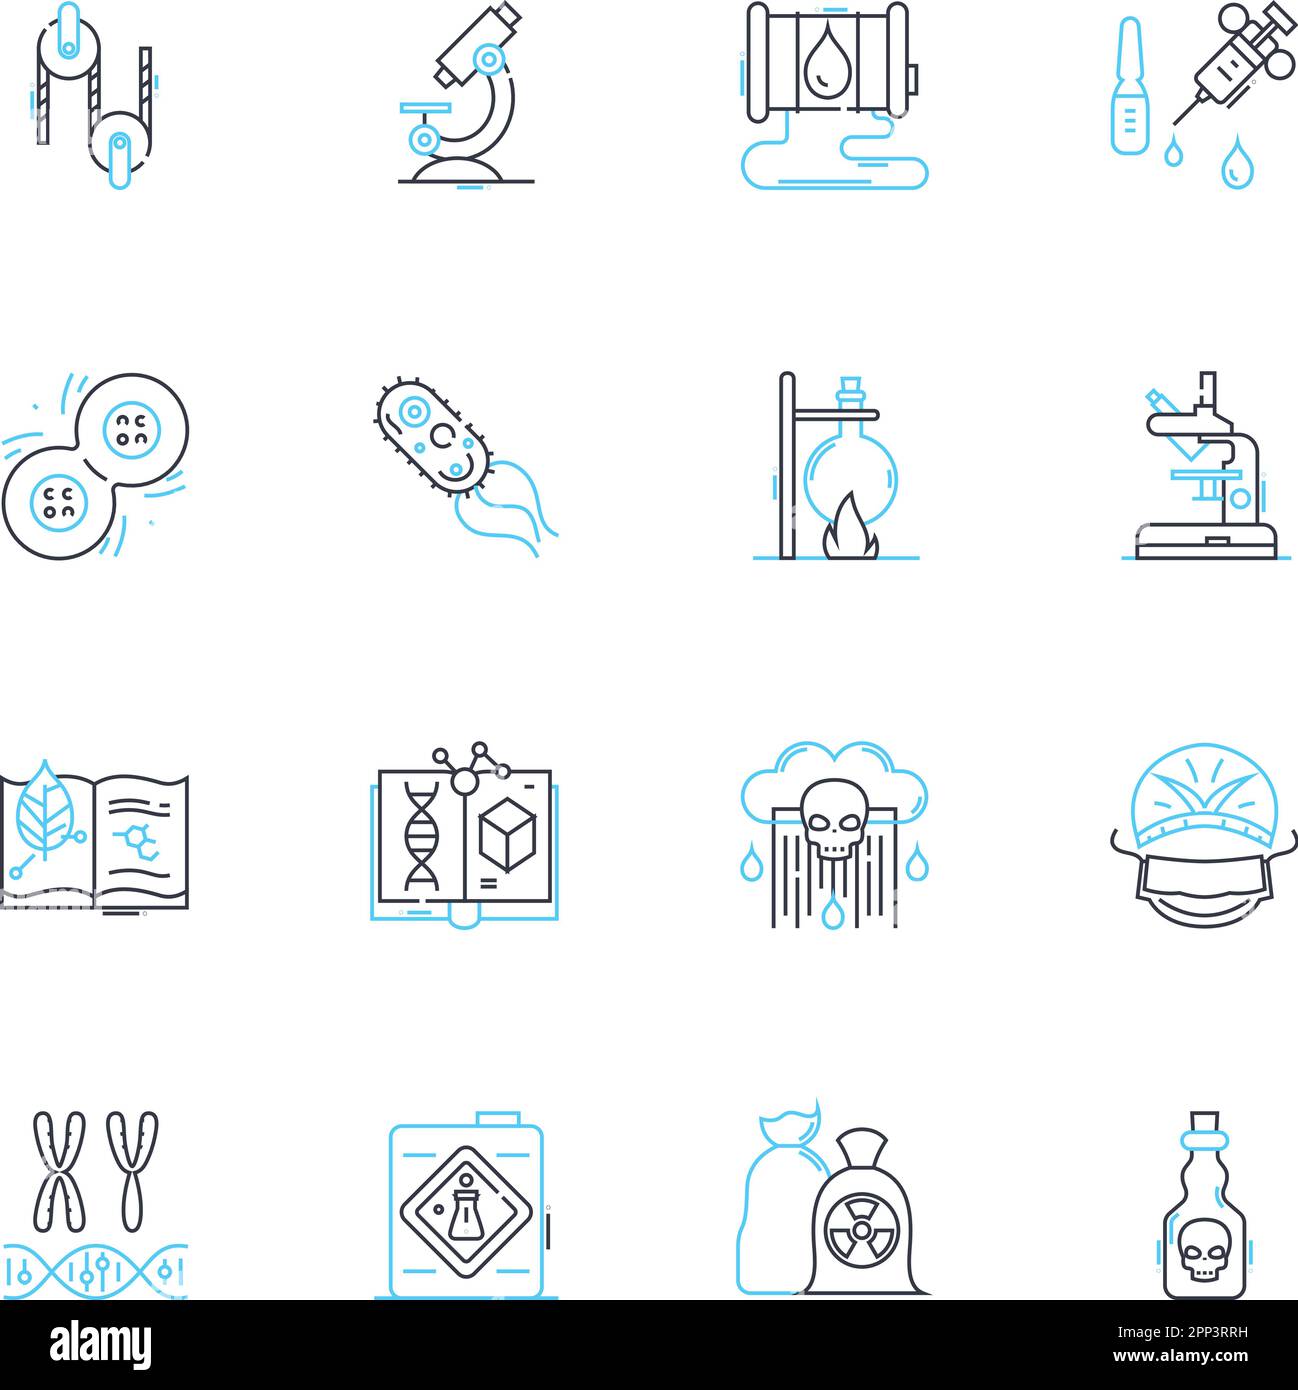 Artificial Science linear icons set. Robotics, Automation, Machine learning, Computer vision, Artificial intelligence, Cybernetics, Nanotechnology Stock Vector